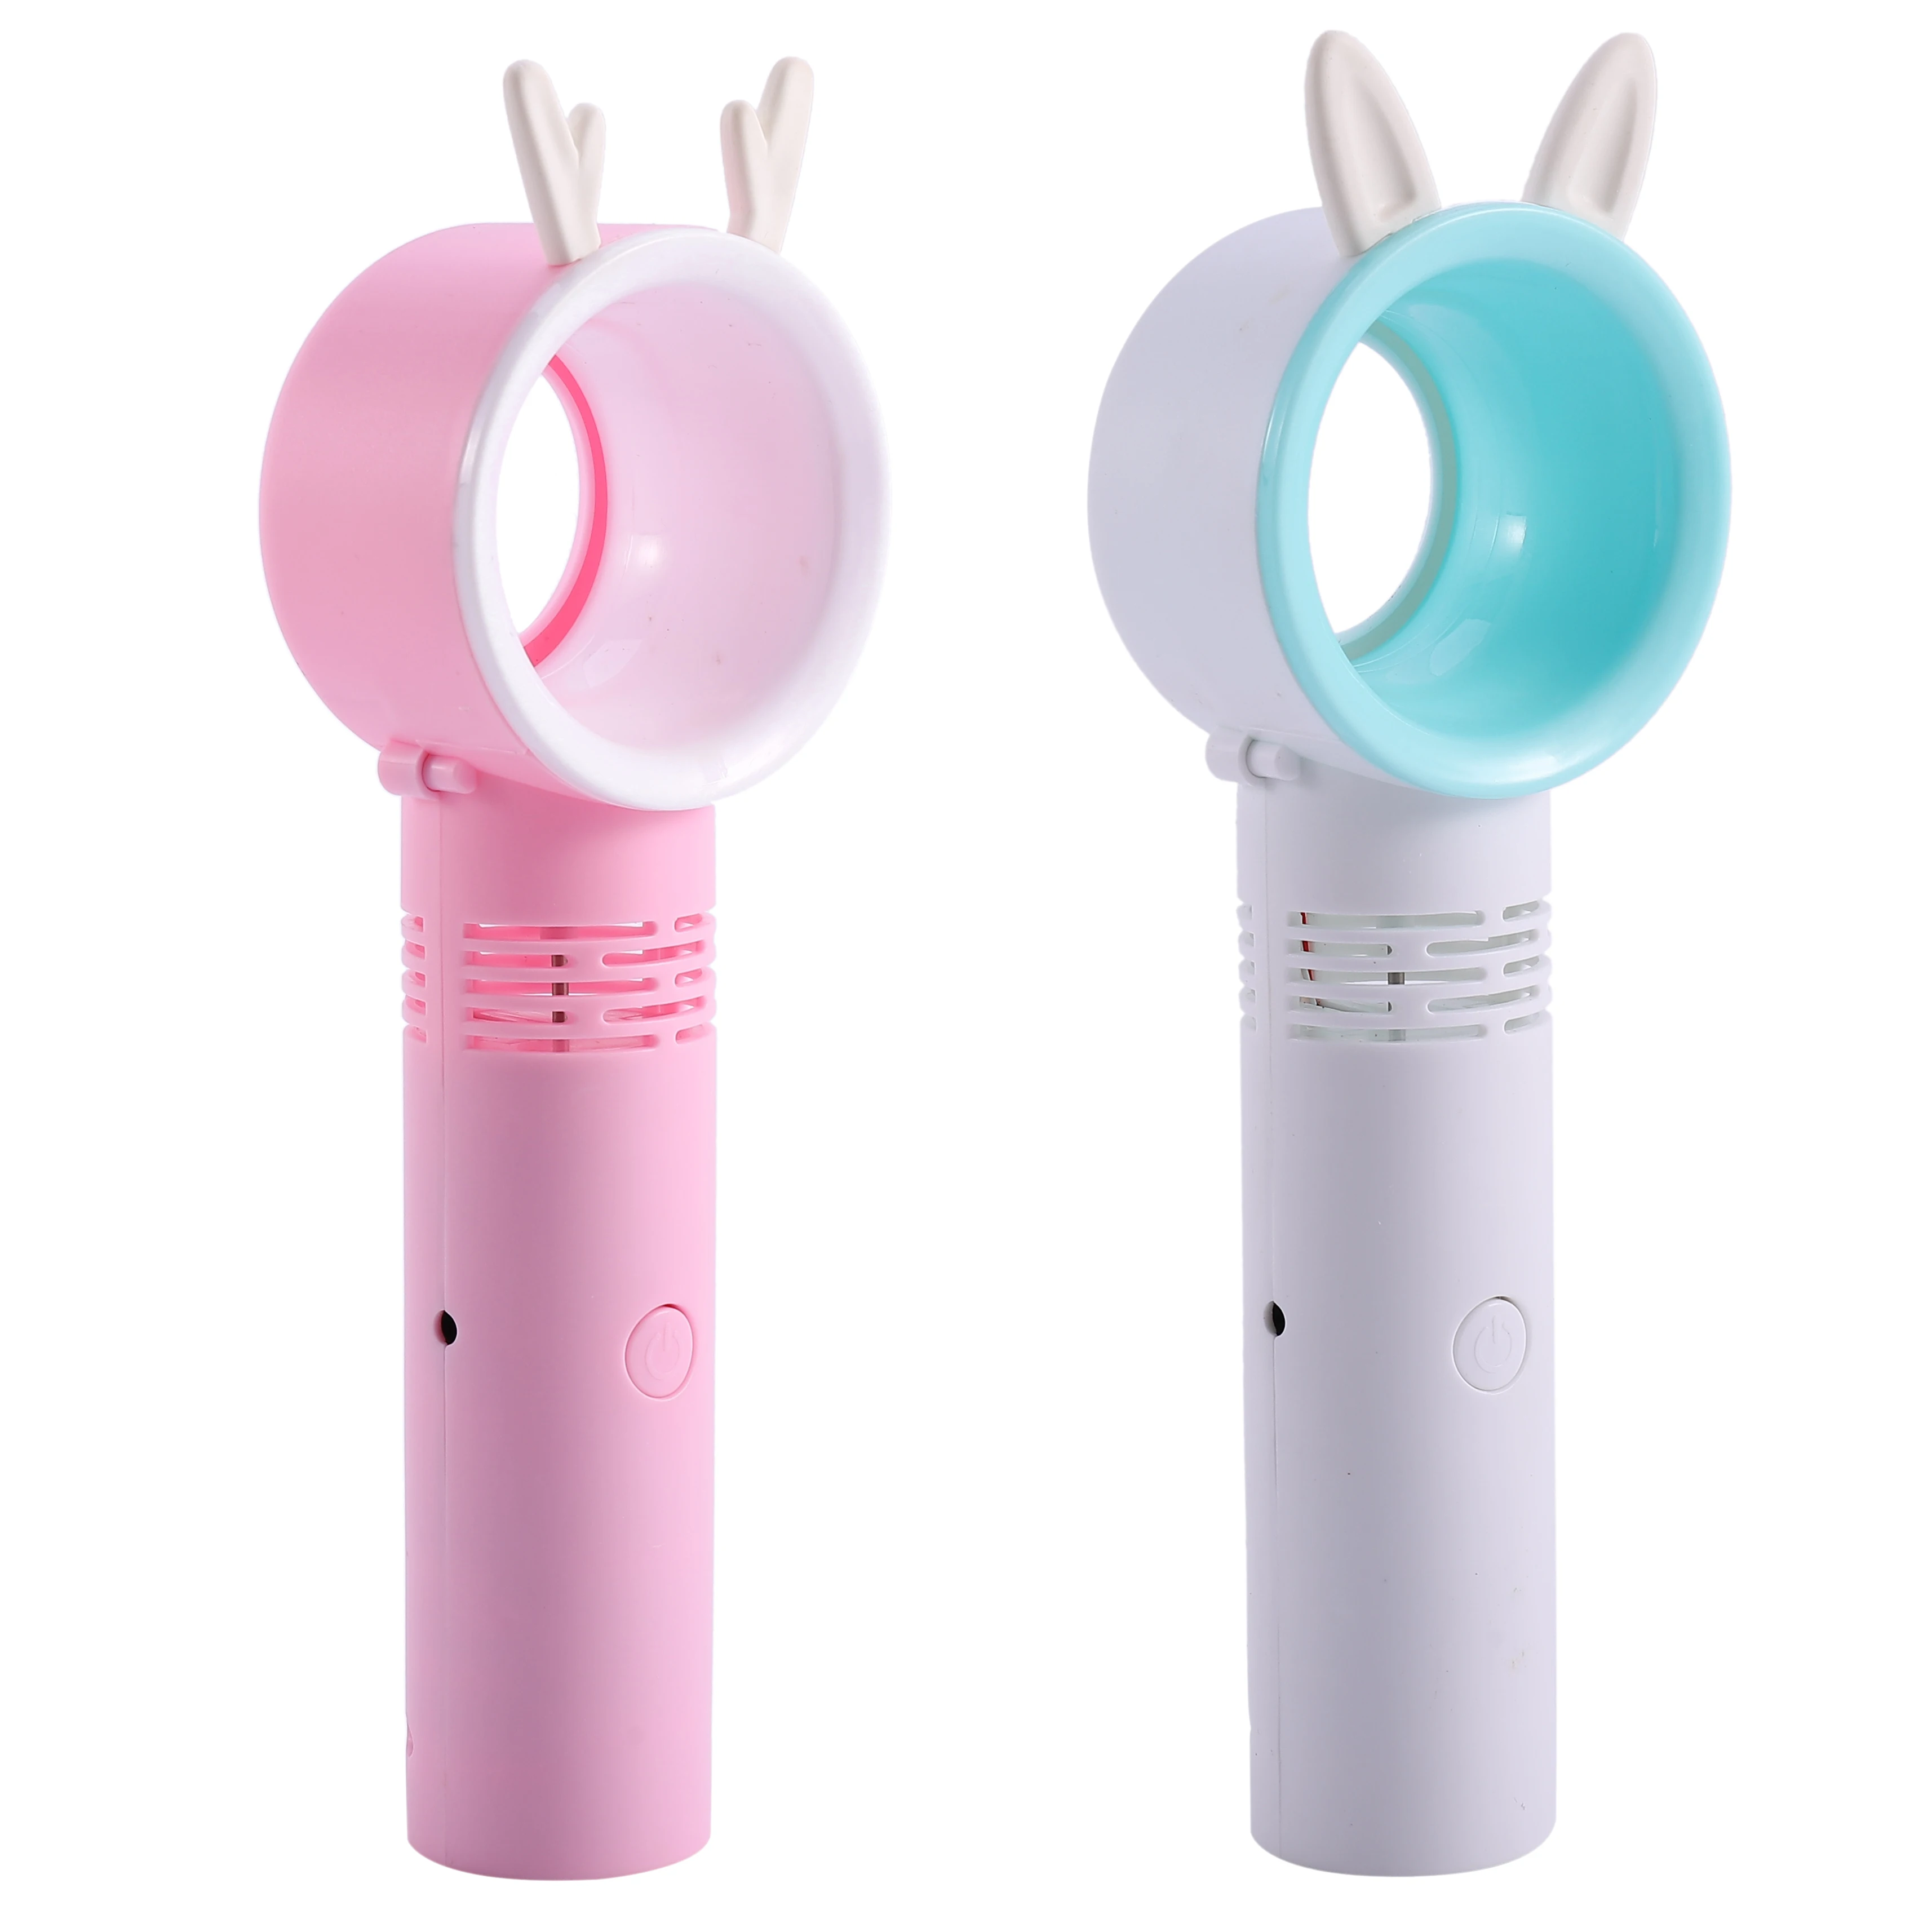 

USB Rechargeable Portable Bladeless Fan Handheld Mini Cooler No Leaf Handy Fan With Light For Student, Dormitory, Office